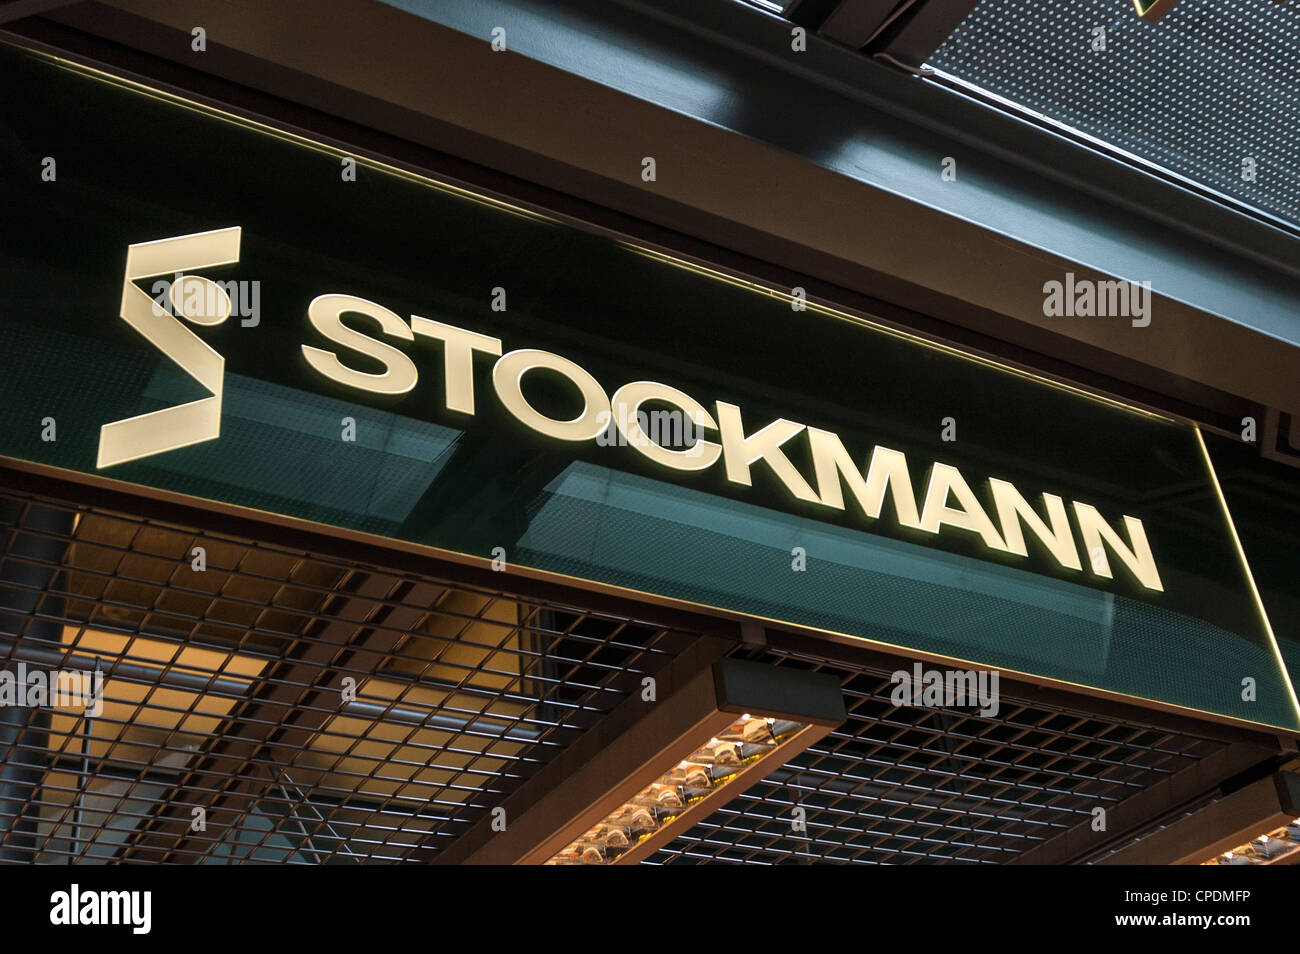 Stockmann's famous department store in Helsinki, Finland. Stock Photo